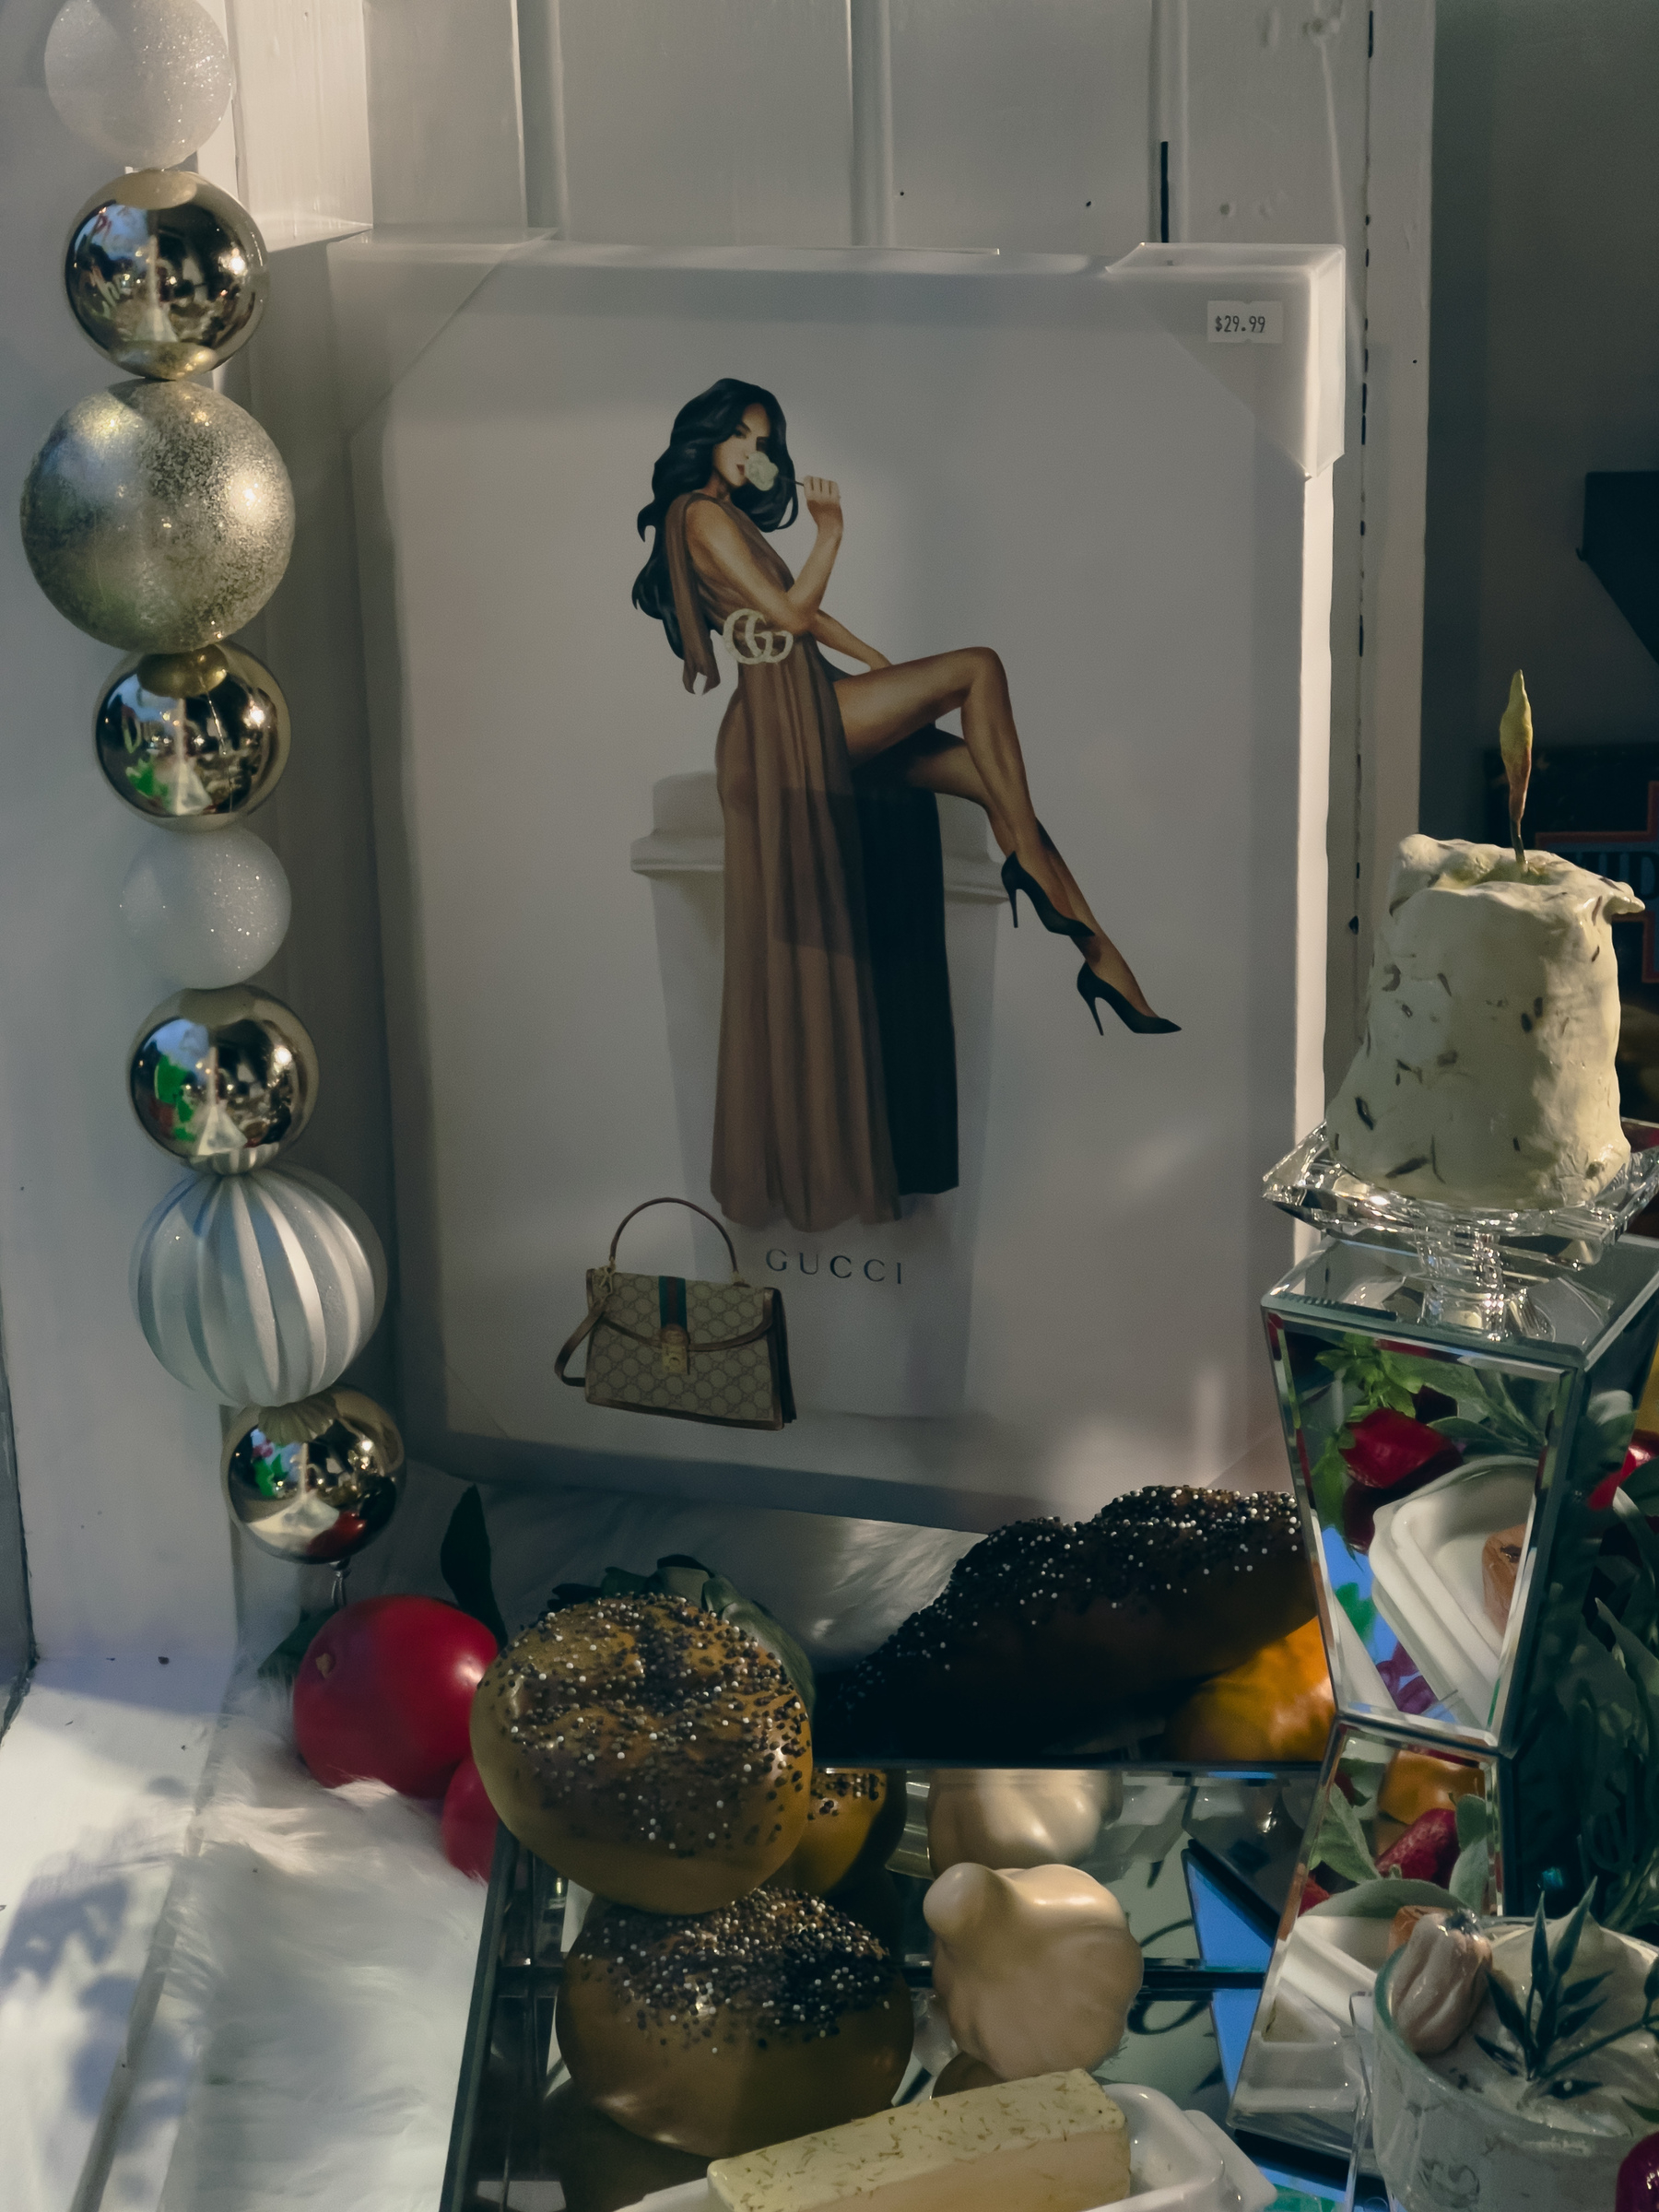 Photograph of women on a pedestal and festive objects in a shop window.